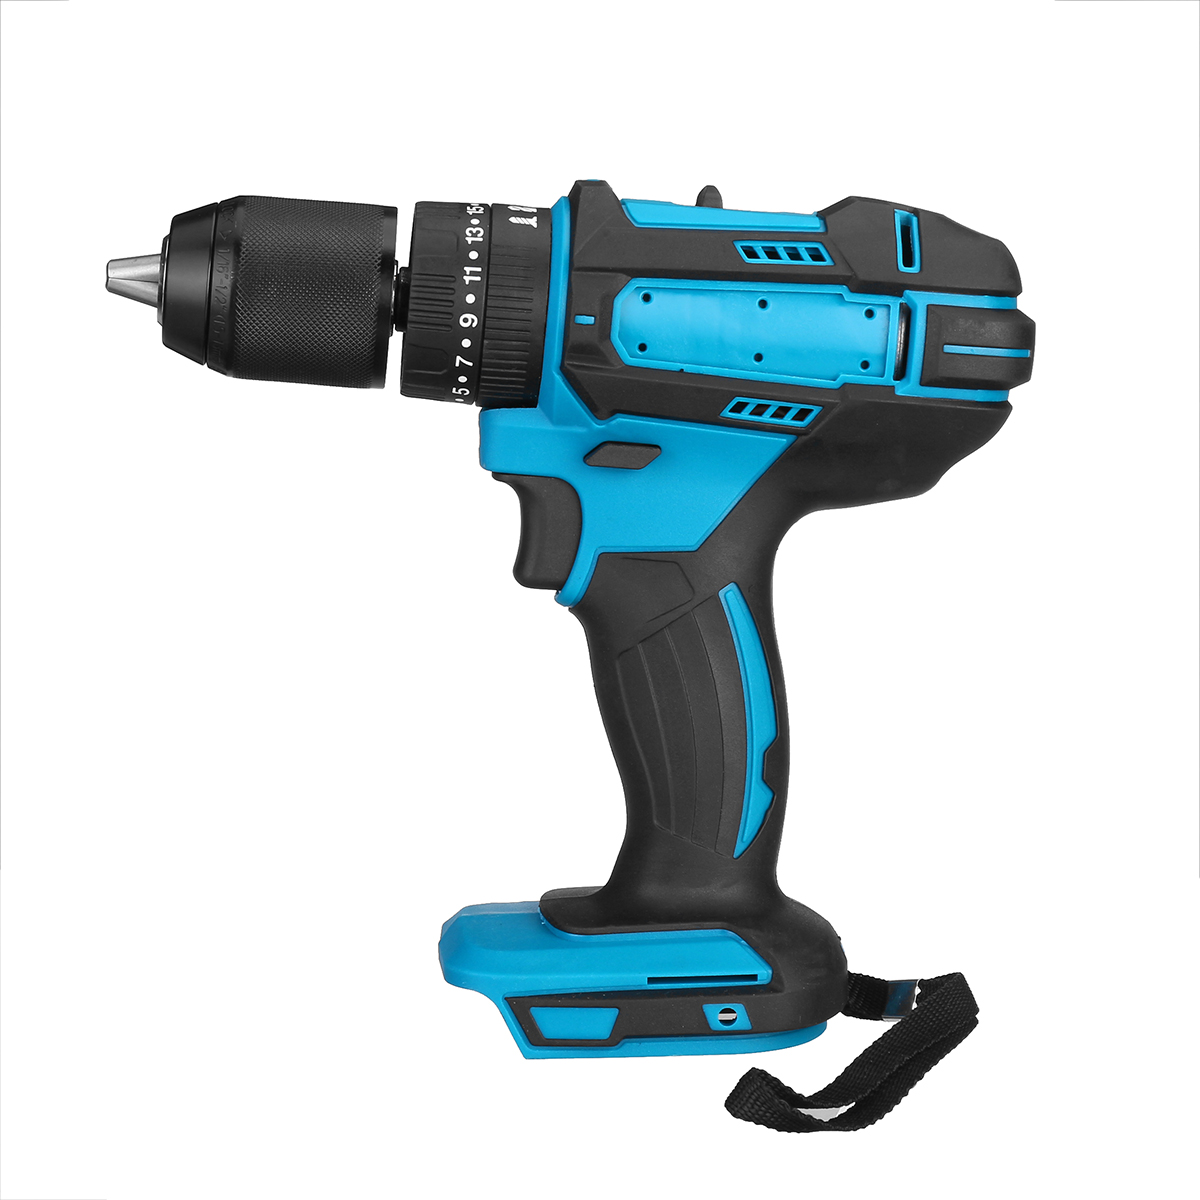 18V-Cordless-Electric-Drill-Driver-Impact-Torque-For-MakitaPower-Tool-1695066-4